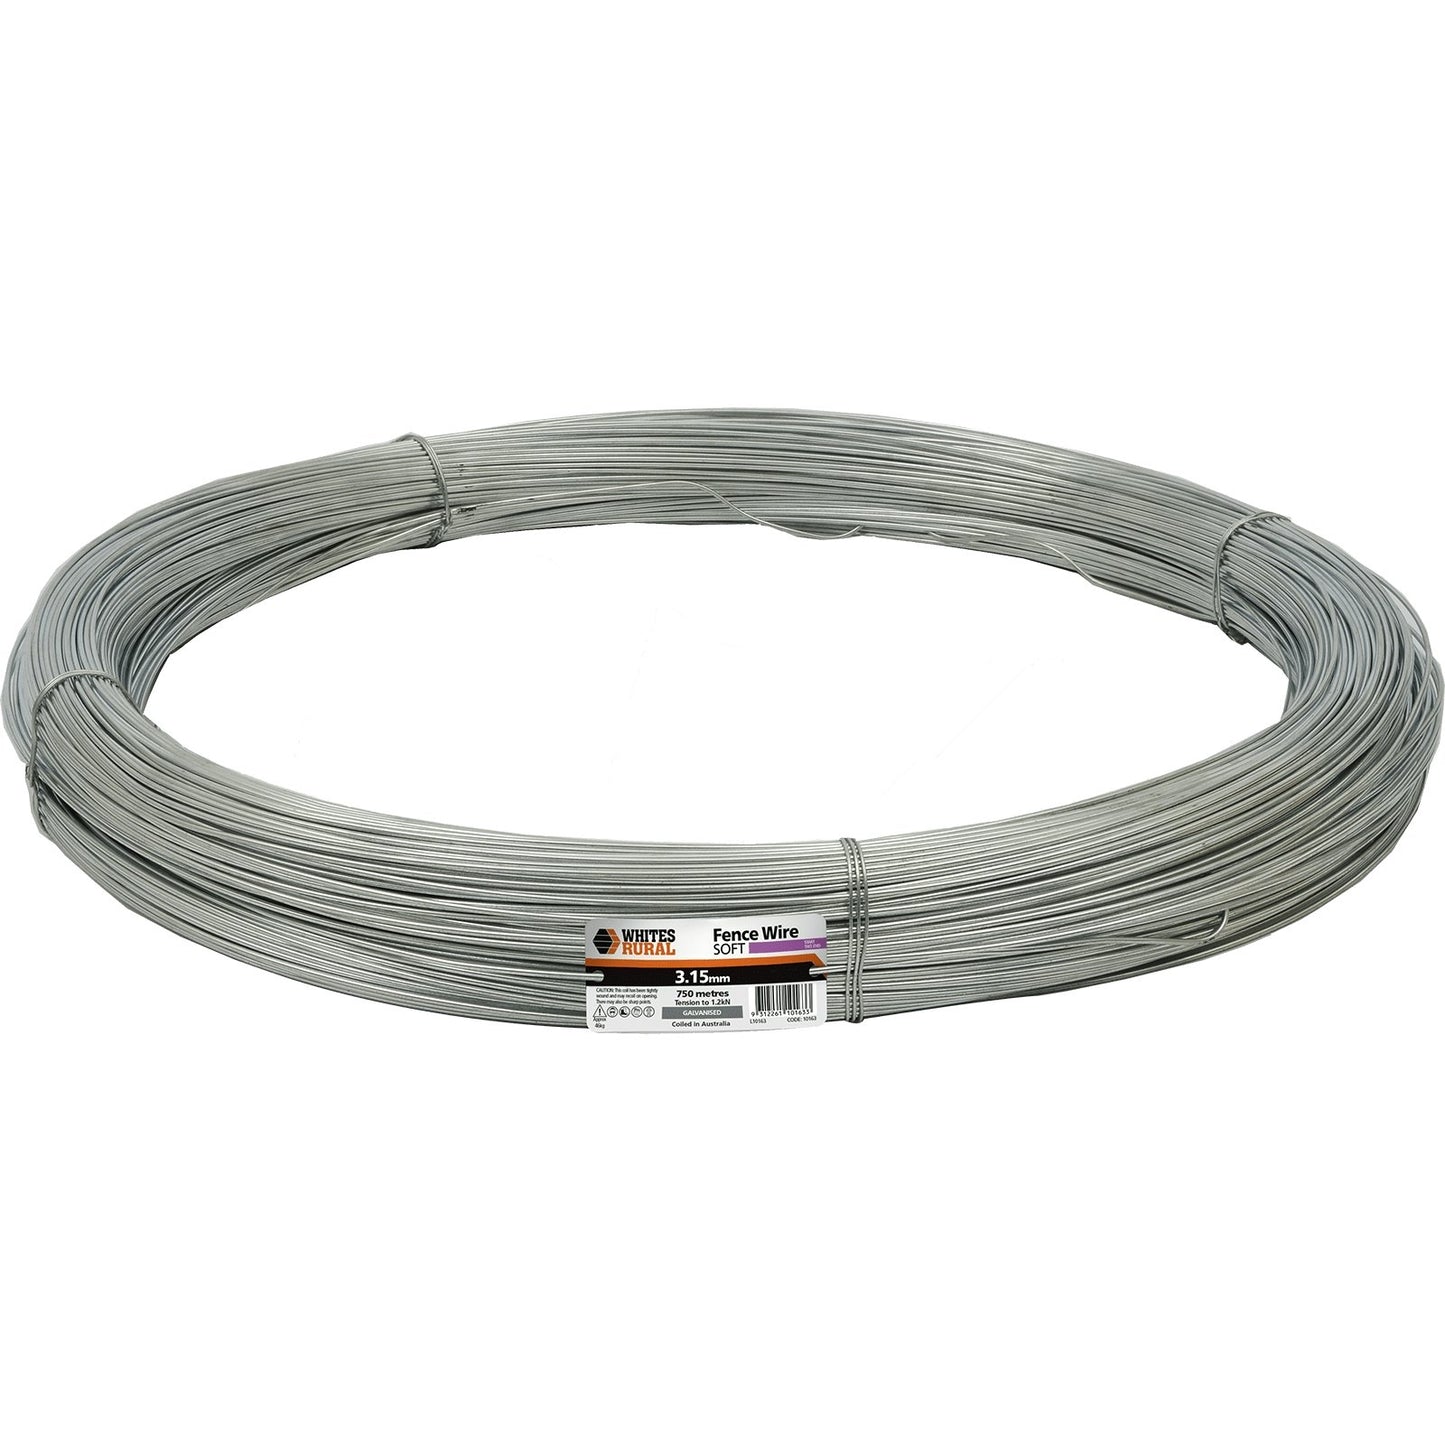 Wire 3.15mm Soft Tensile 750m Whites - Woonona Petfood & Produce